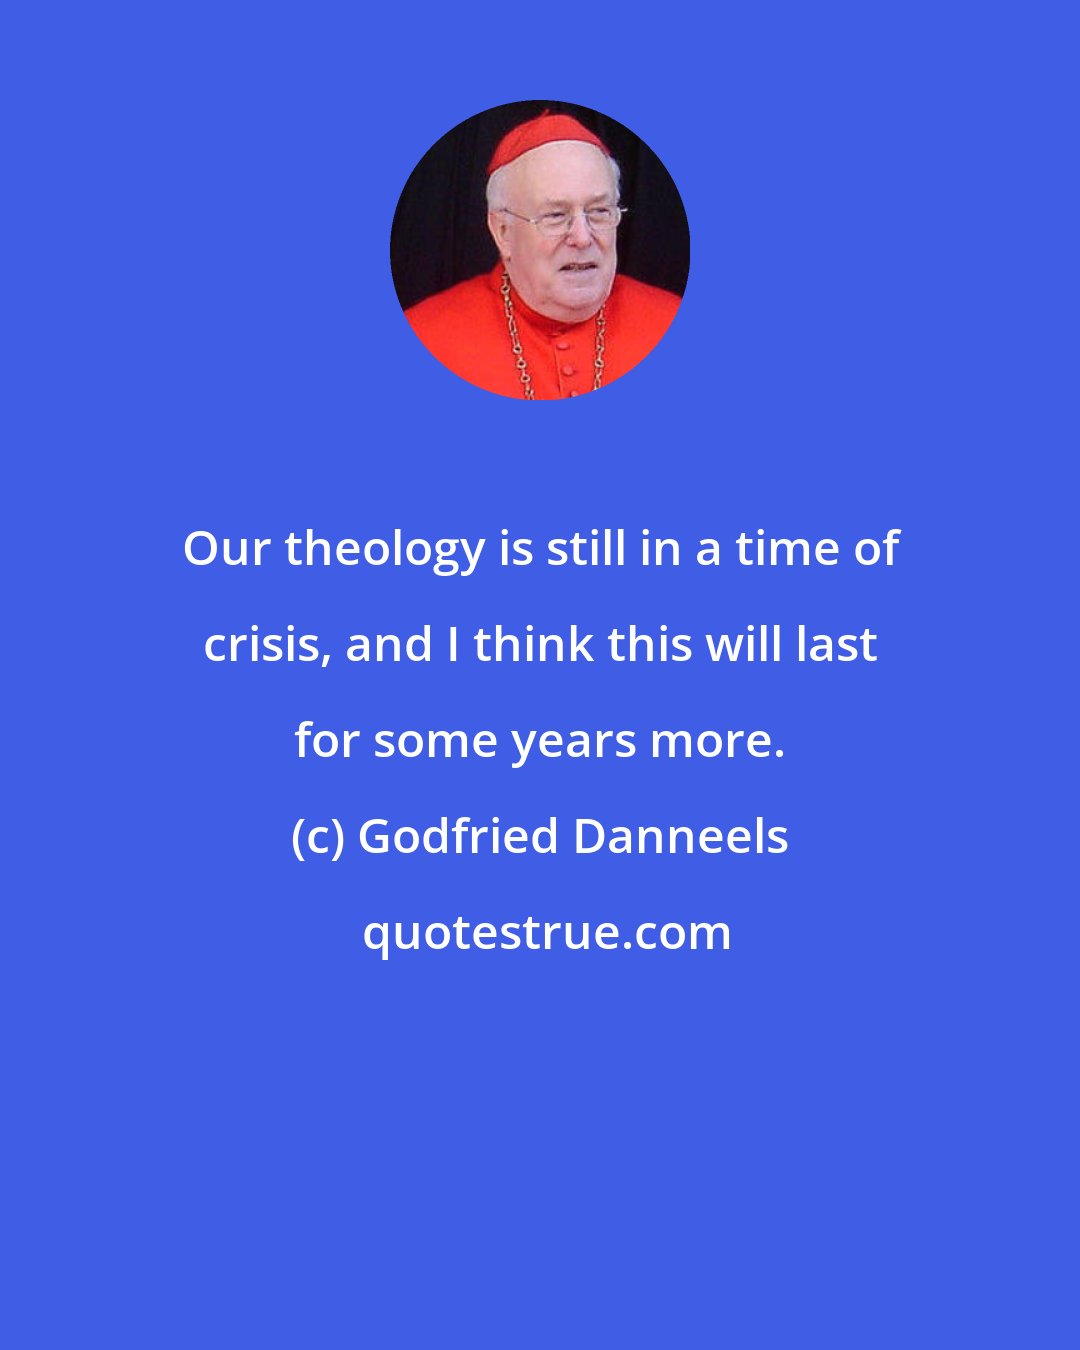 Godfried Danneels: Our theology is still in a time of crisis, and I think this will last for some years more.